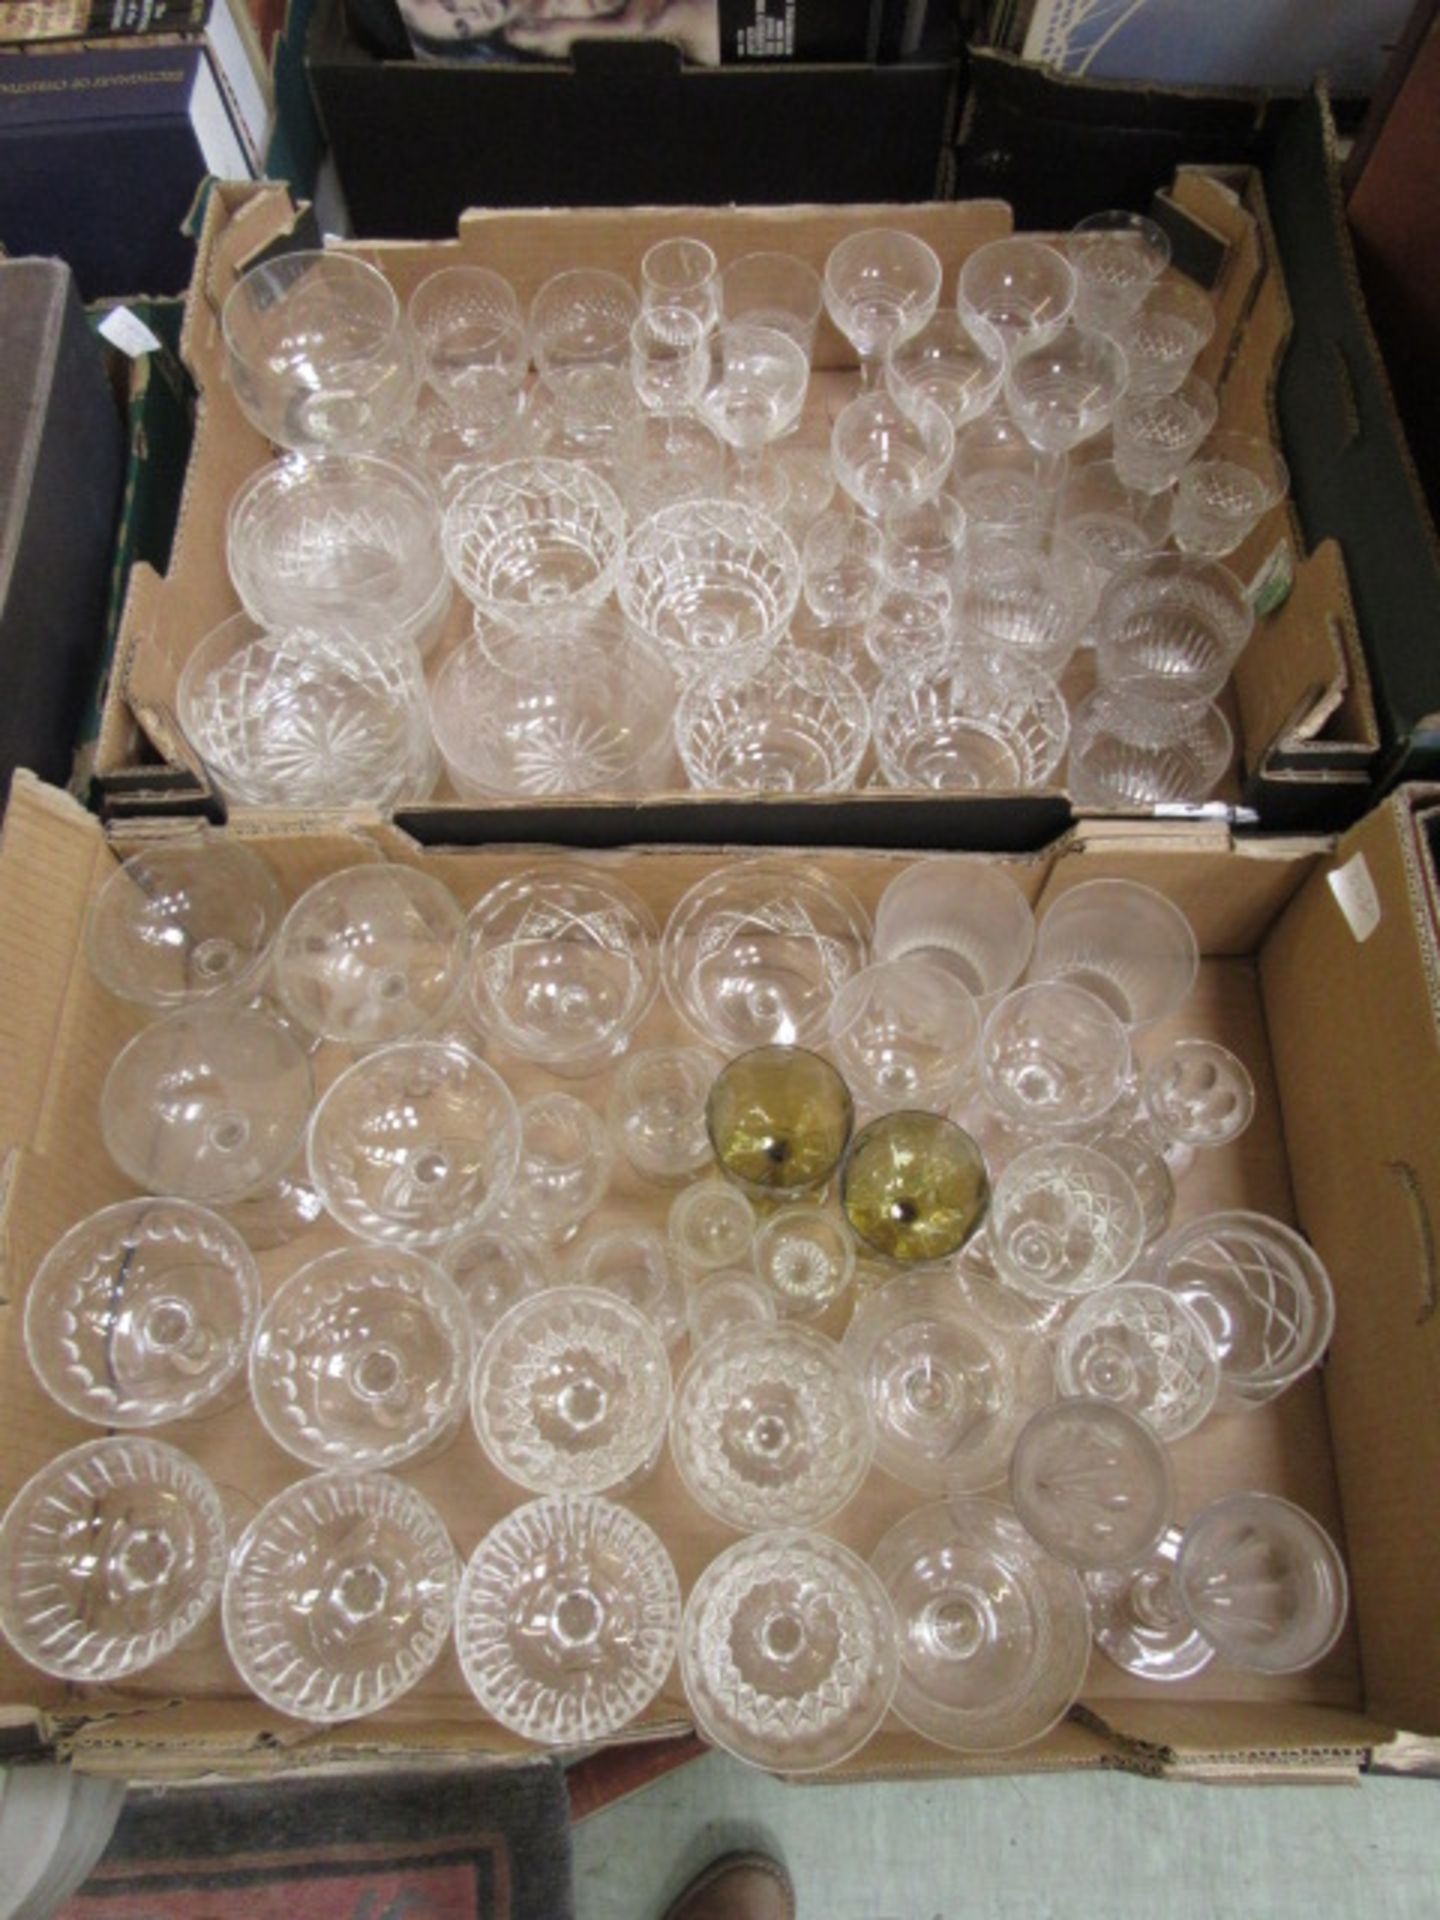 Two trays of glass drinking vessels